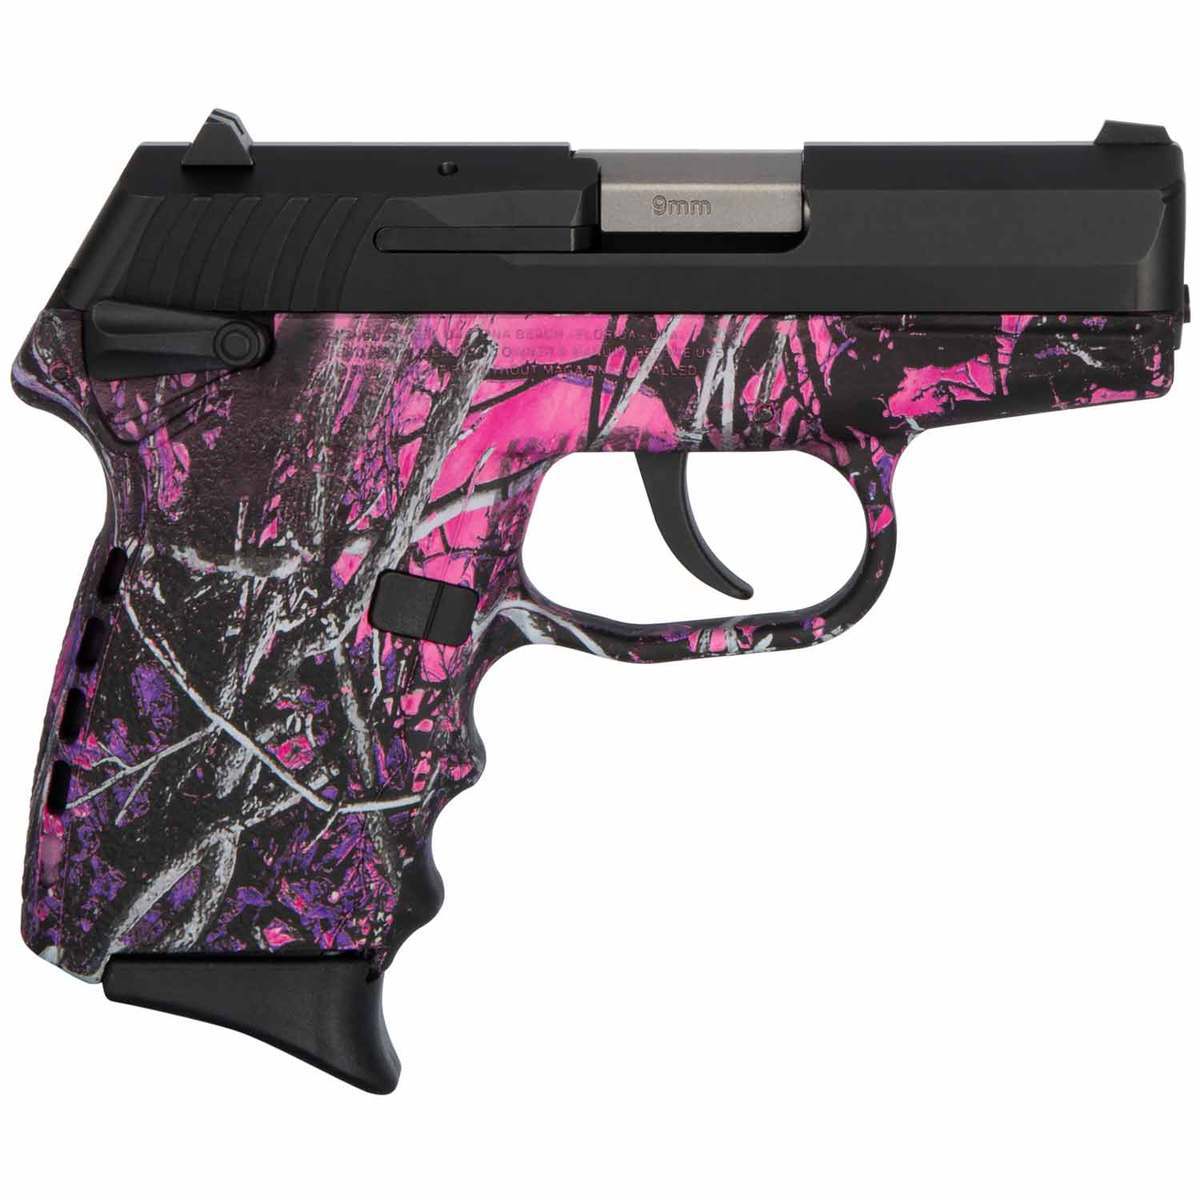 sccy-cpx-1-carbon-9mm-luger-31in-blackmuddy-girl-pistol-101-rounds-1620079-1.jpg